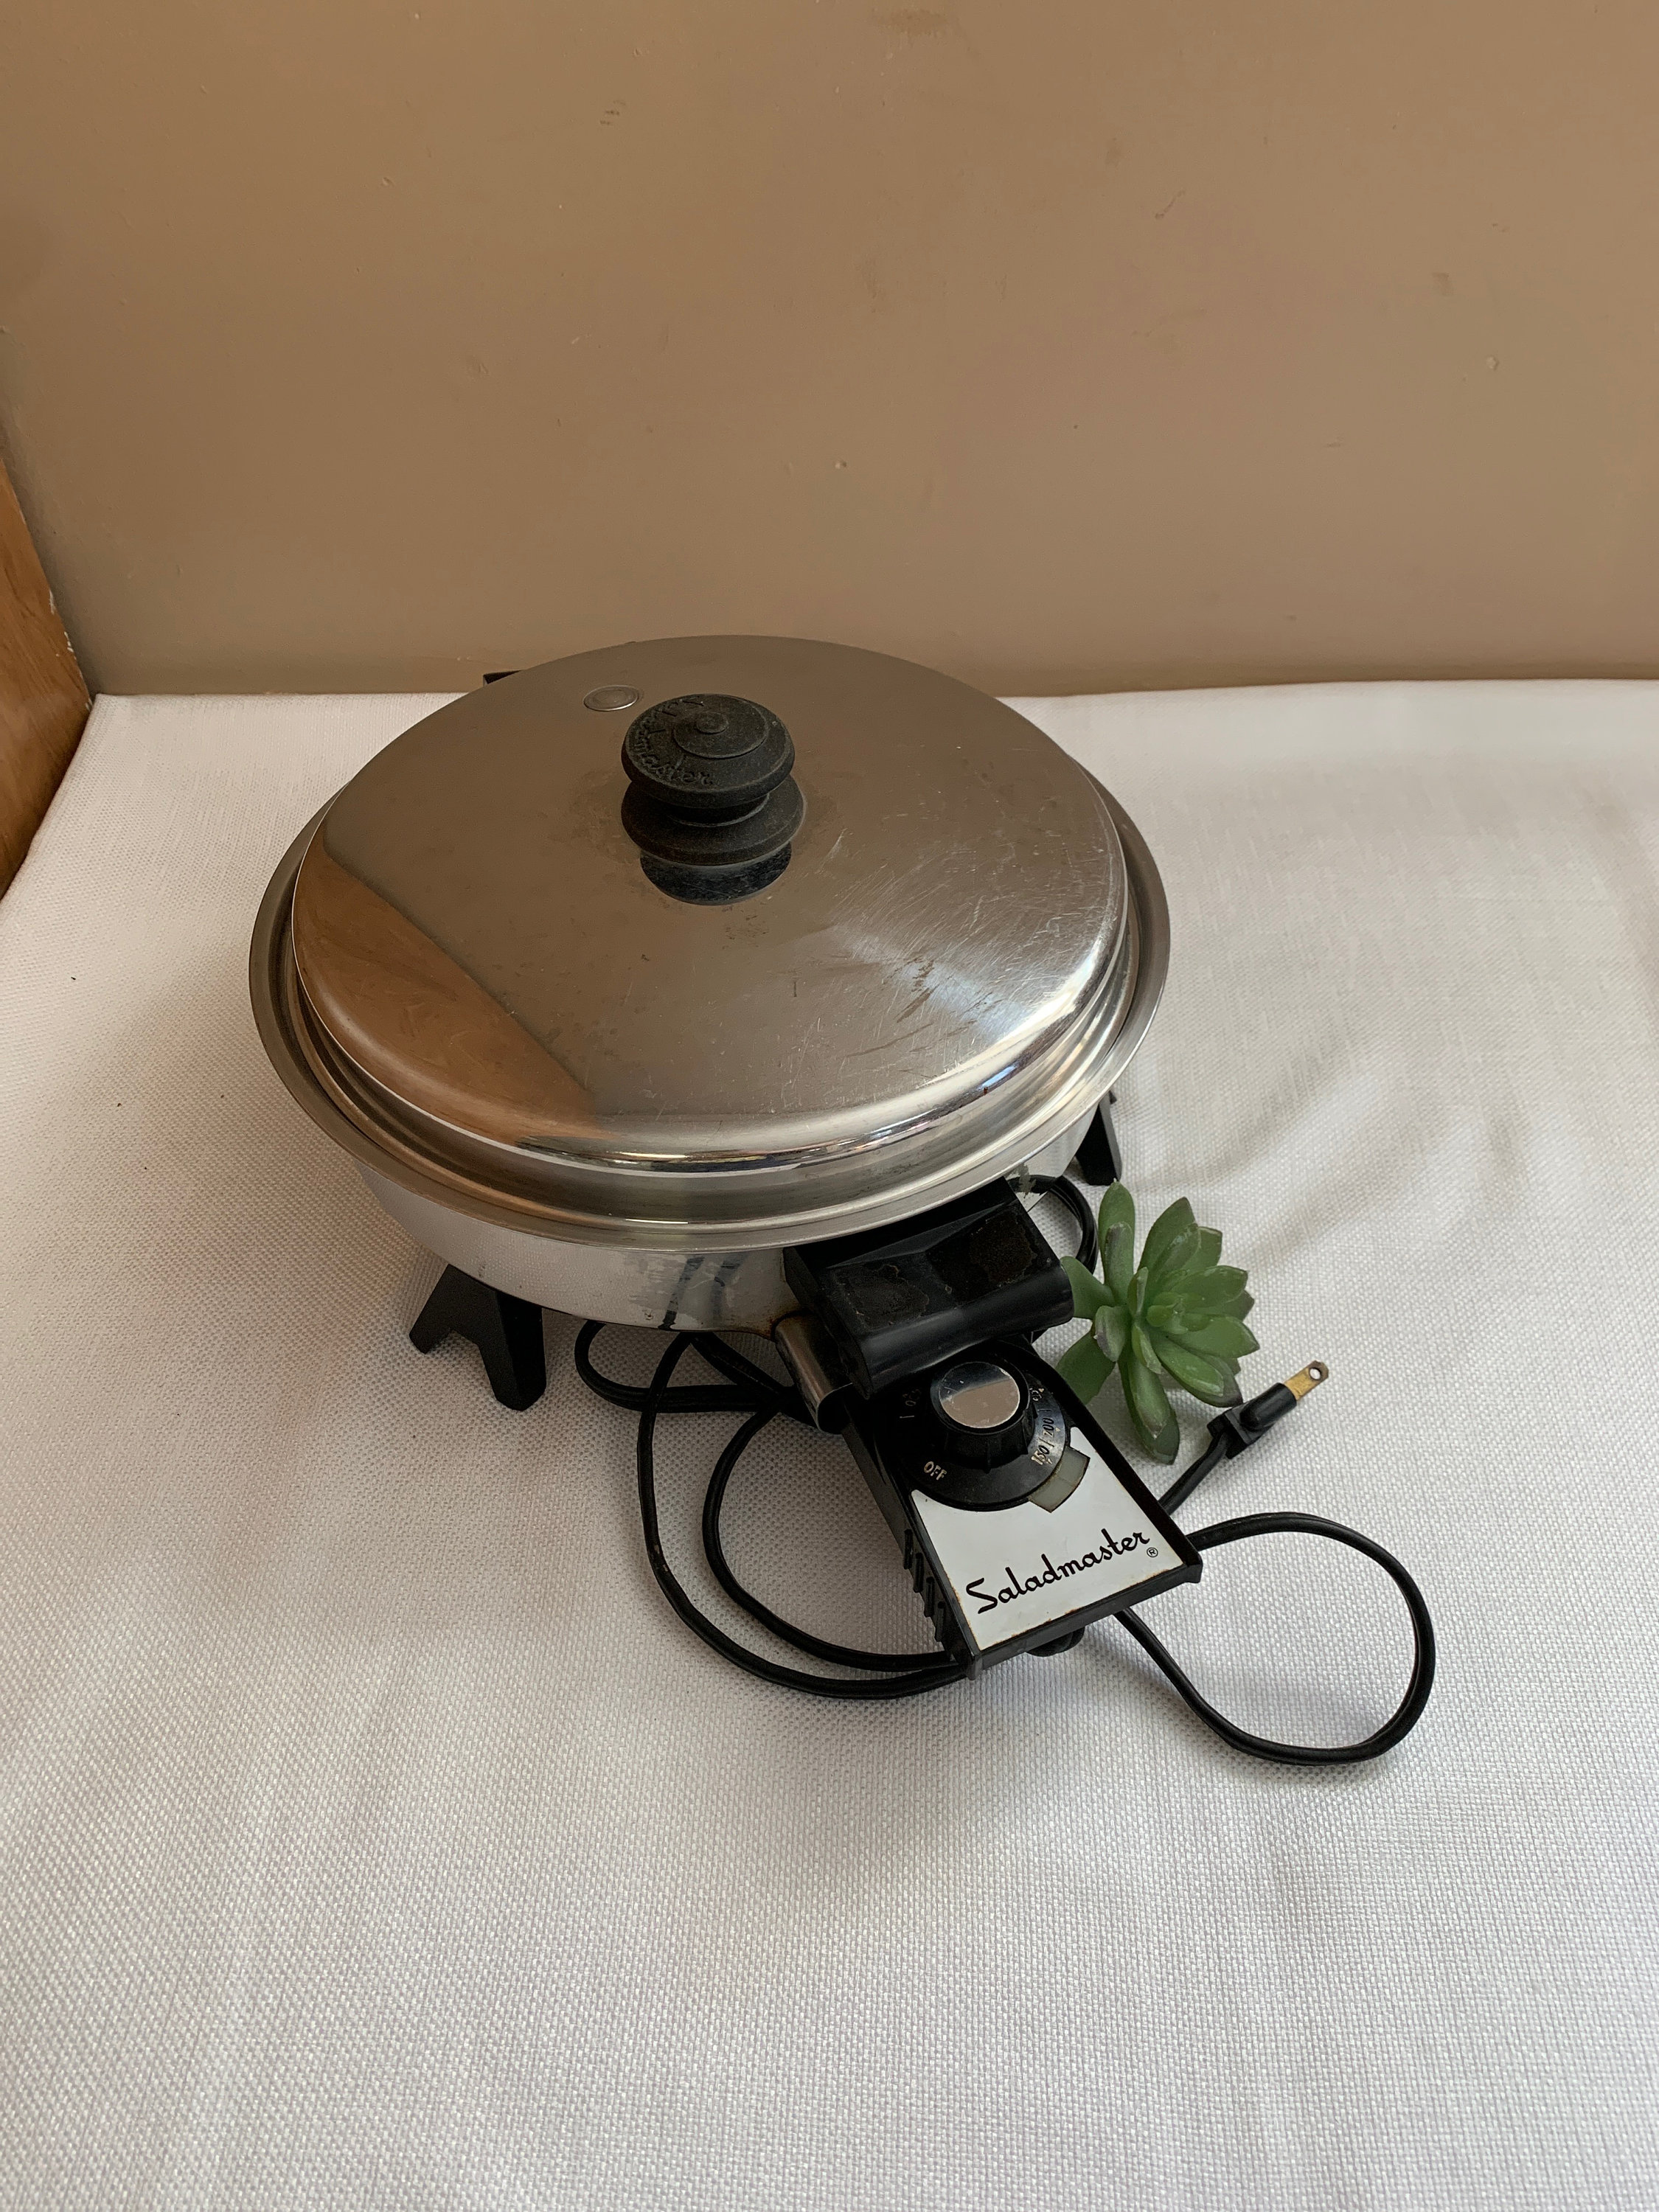 Vintage Electric Skillet, Saladmaster 7817, Round 10 Footed Electric Frying  Pan, Vented Dome Lid, Retro Atomic Counter Kitchen Appliance 